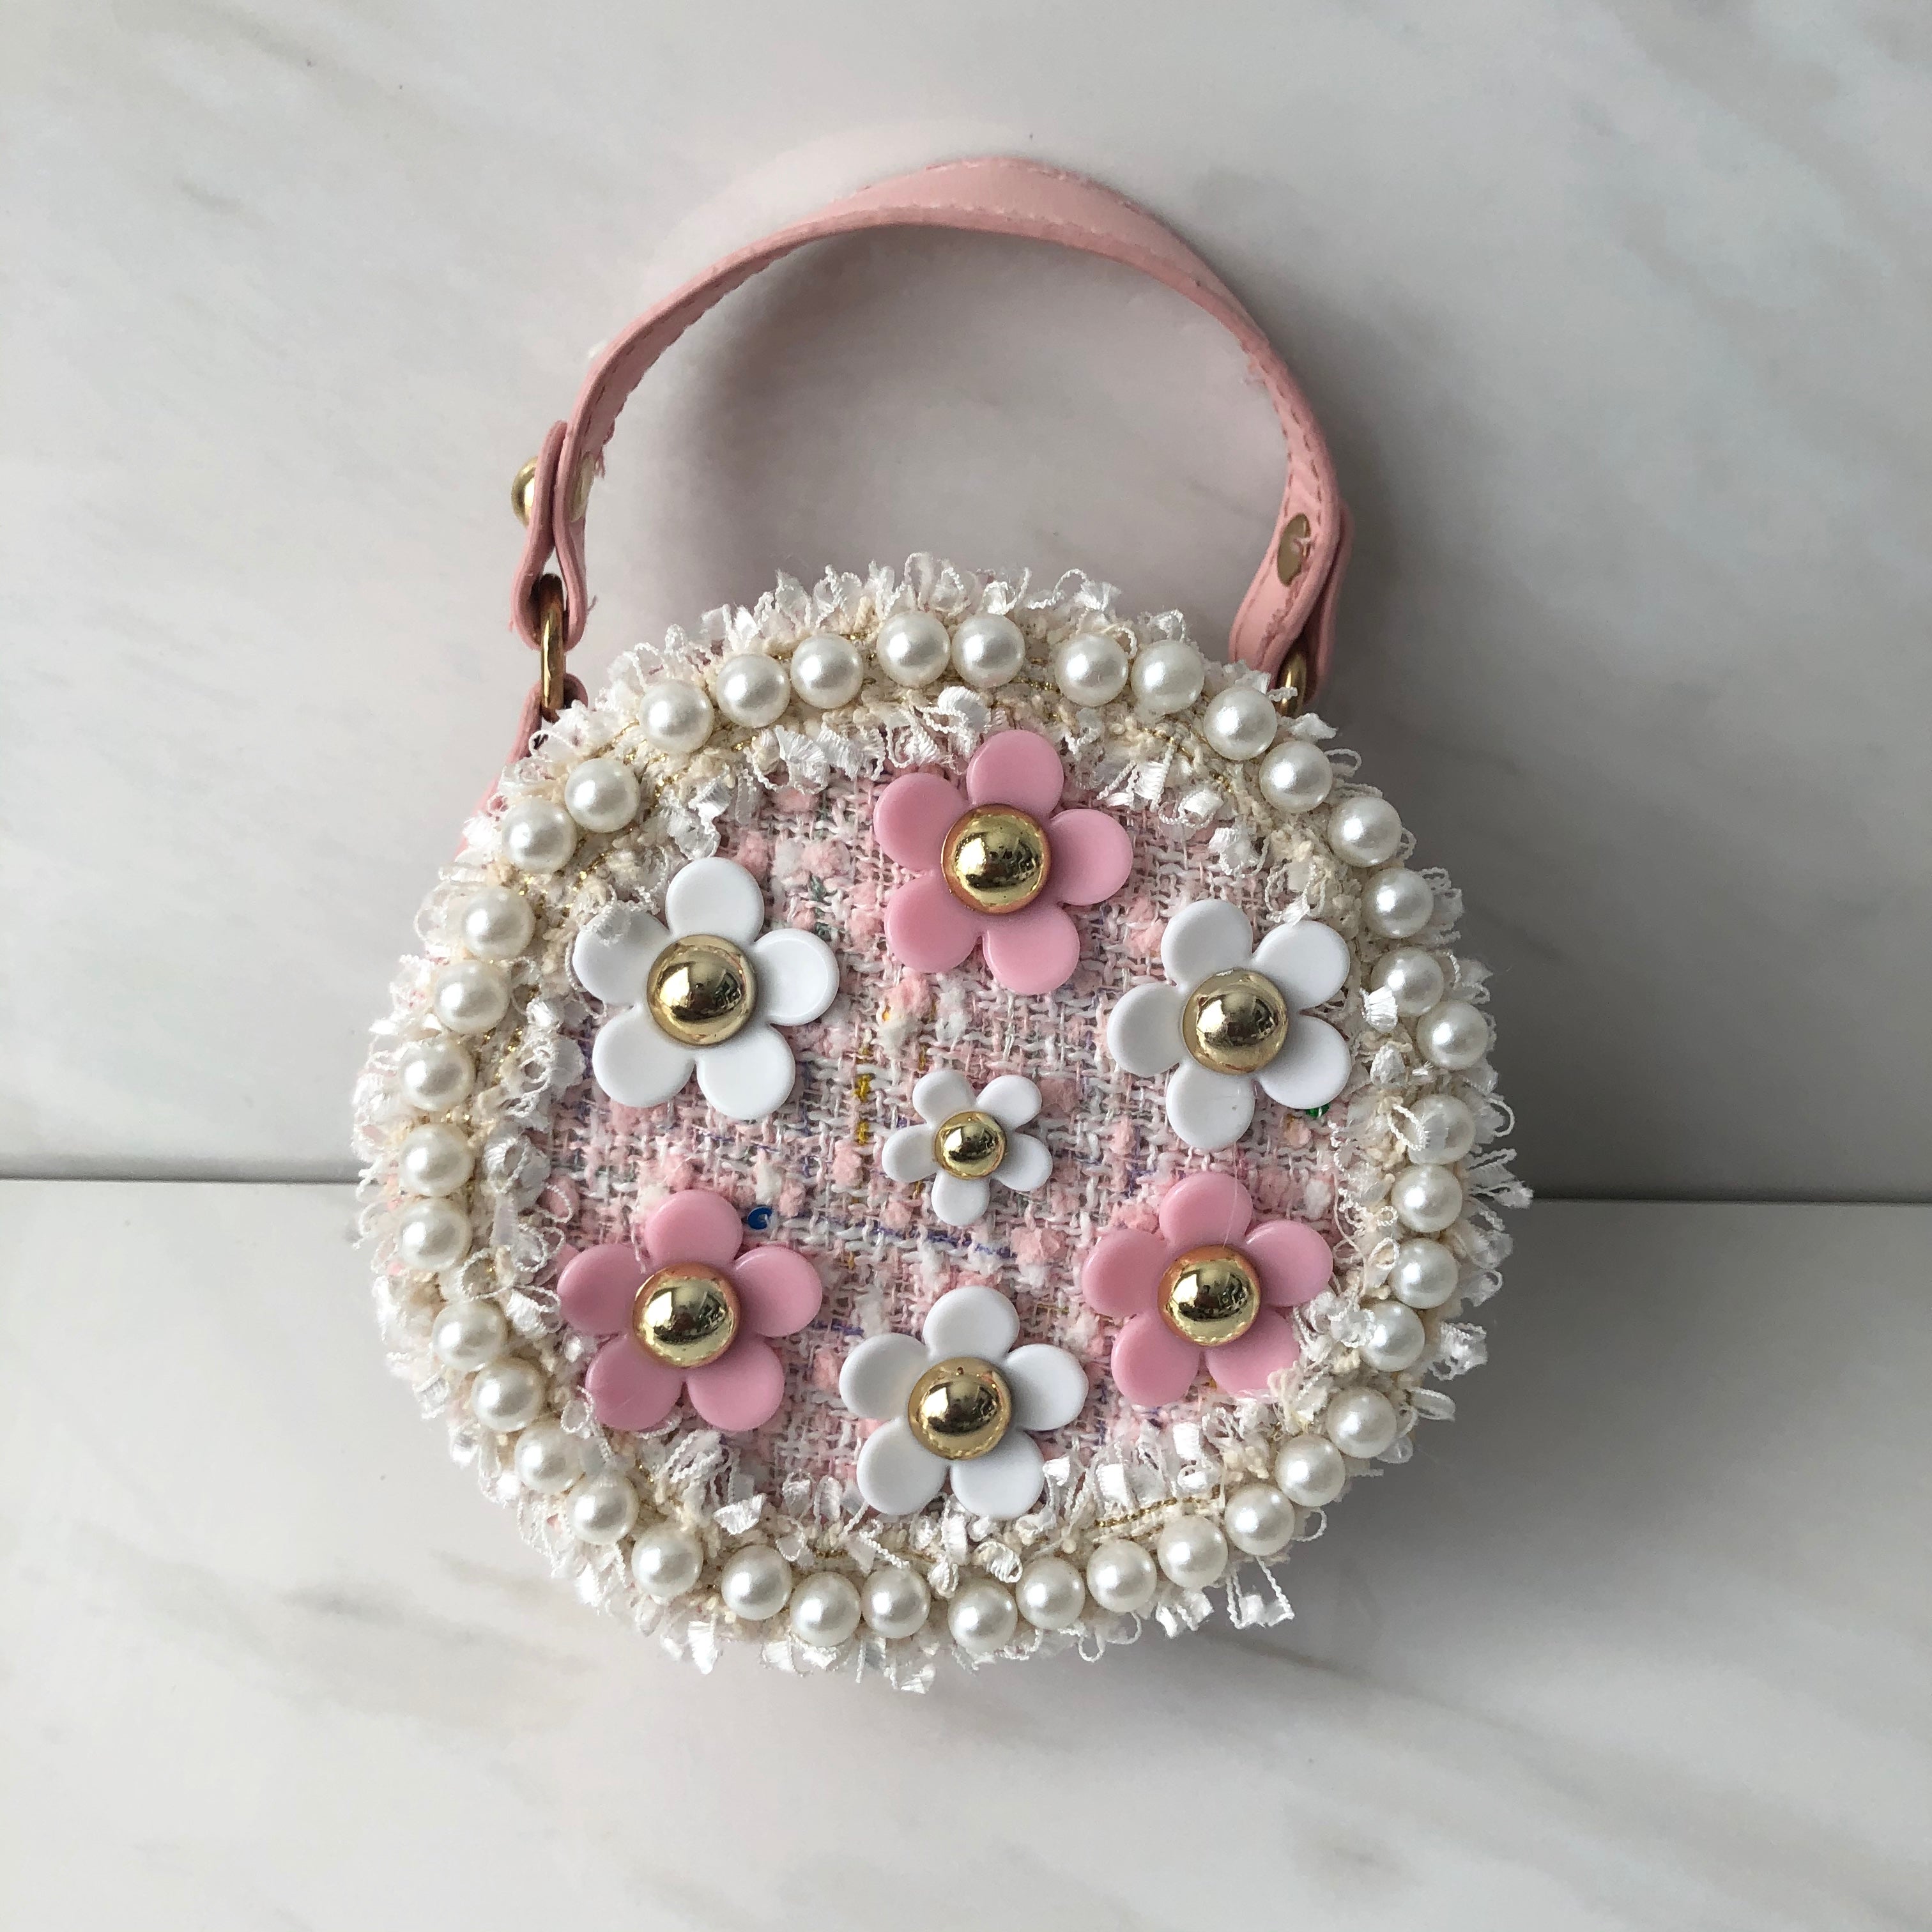 Buy Cotton Candy Patch Bag, Pink Flower Girl Bag, Button Art Purse, Gift  for Dauther's Birthday, Pink Daisy Handbag Online in India - Etsy